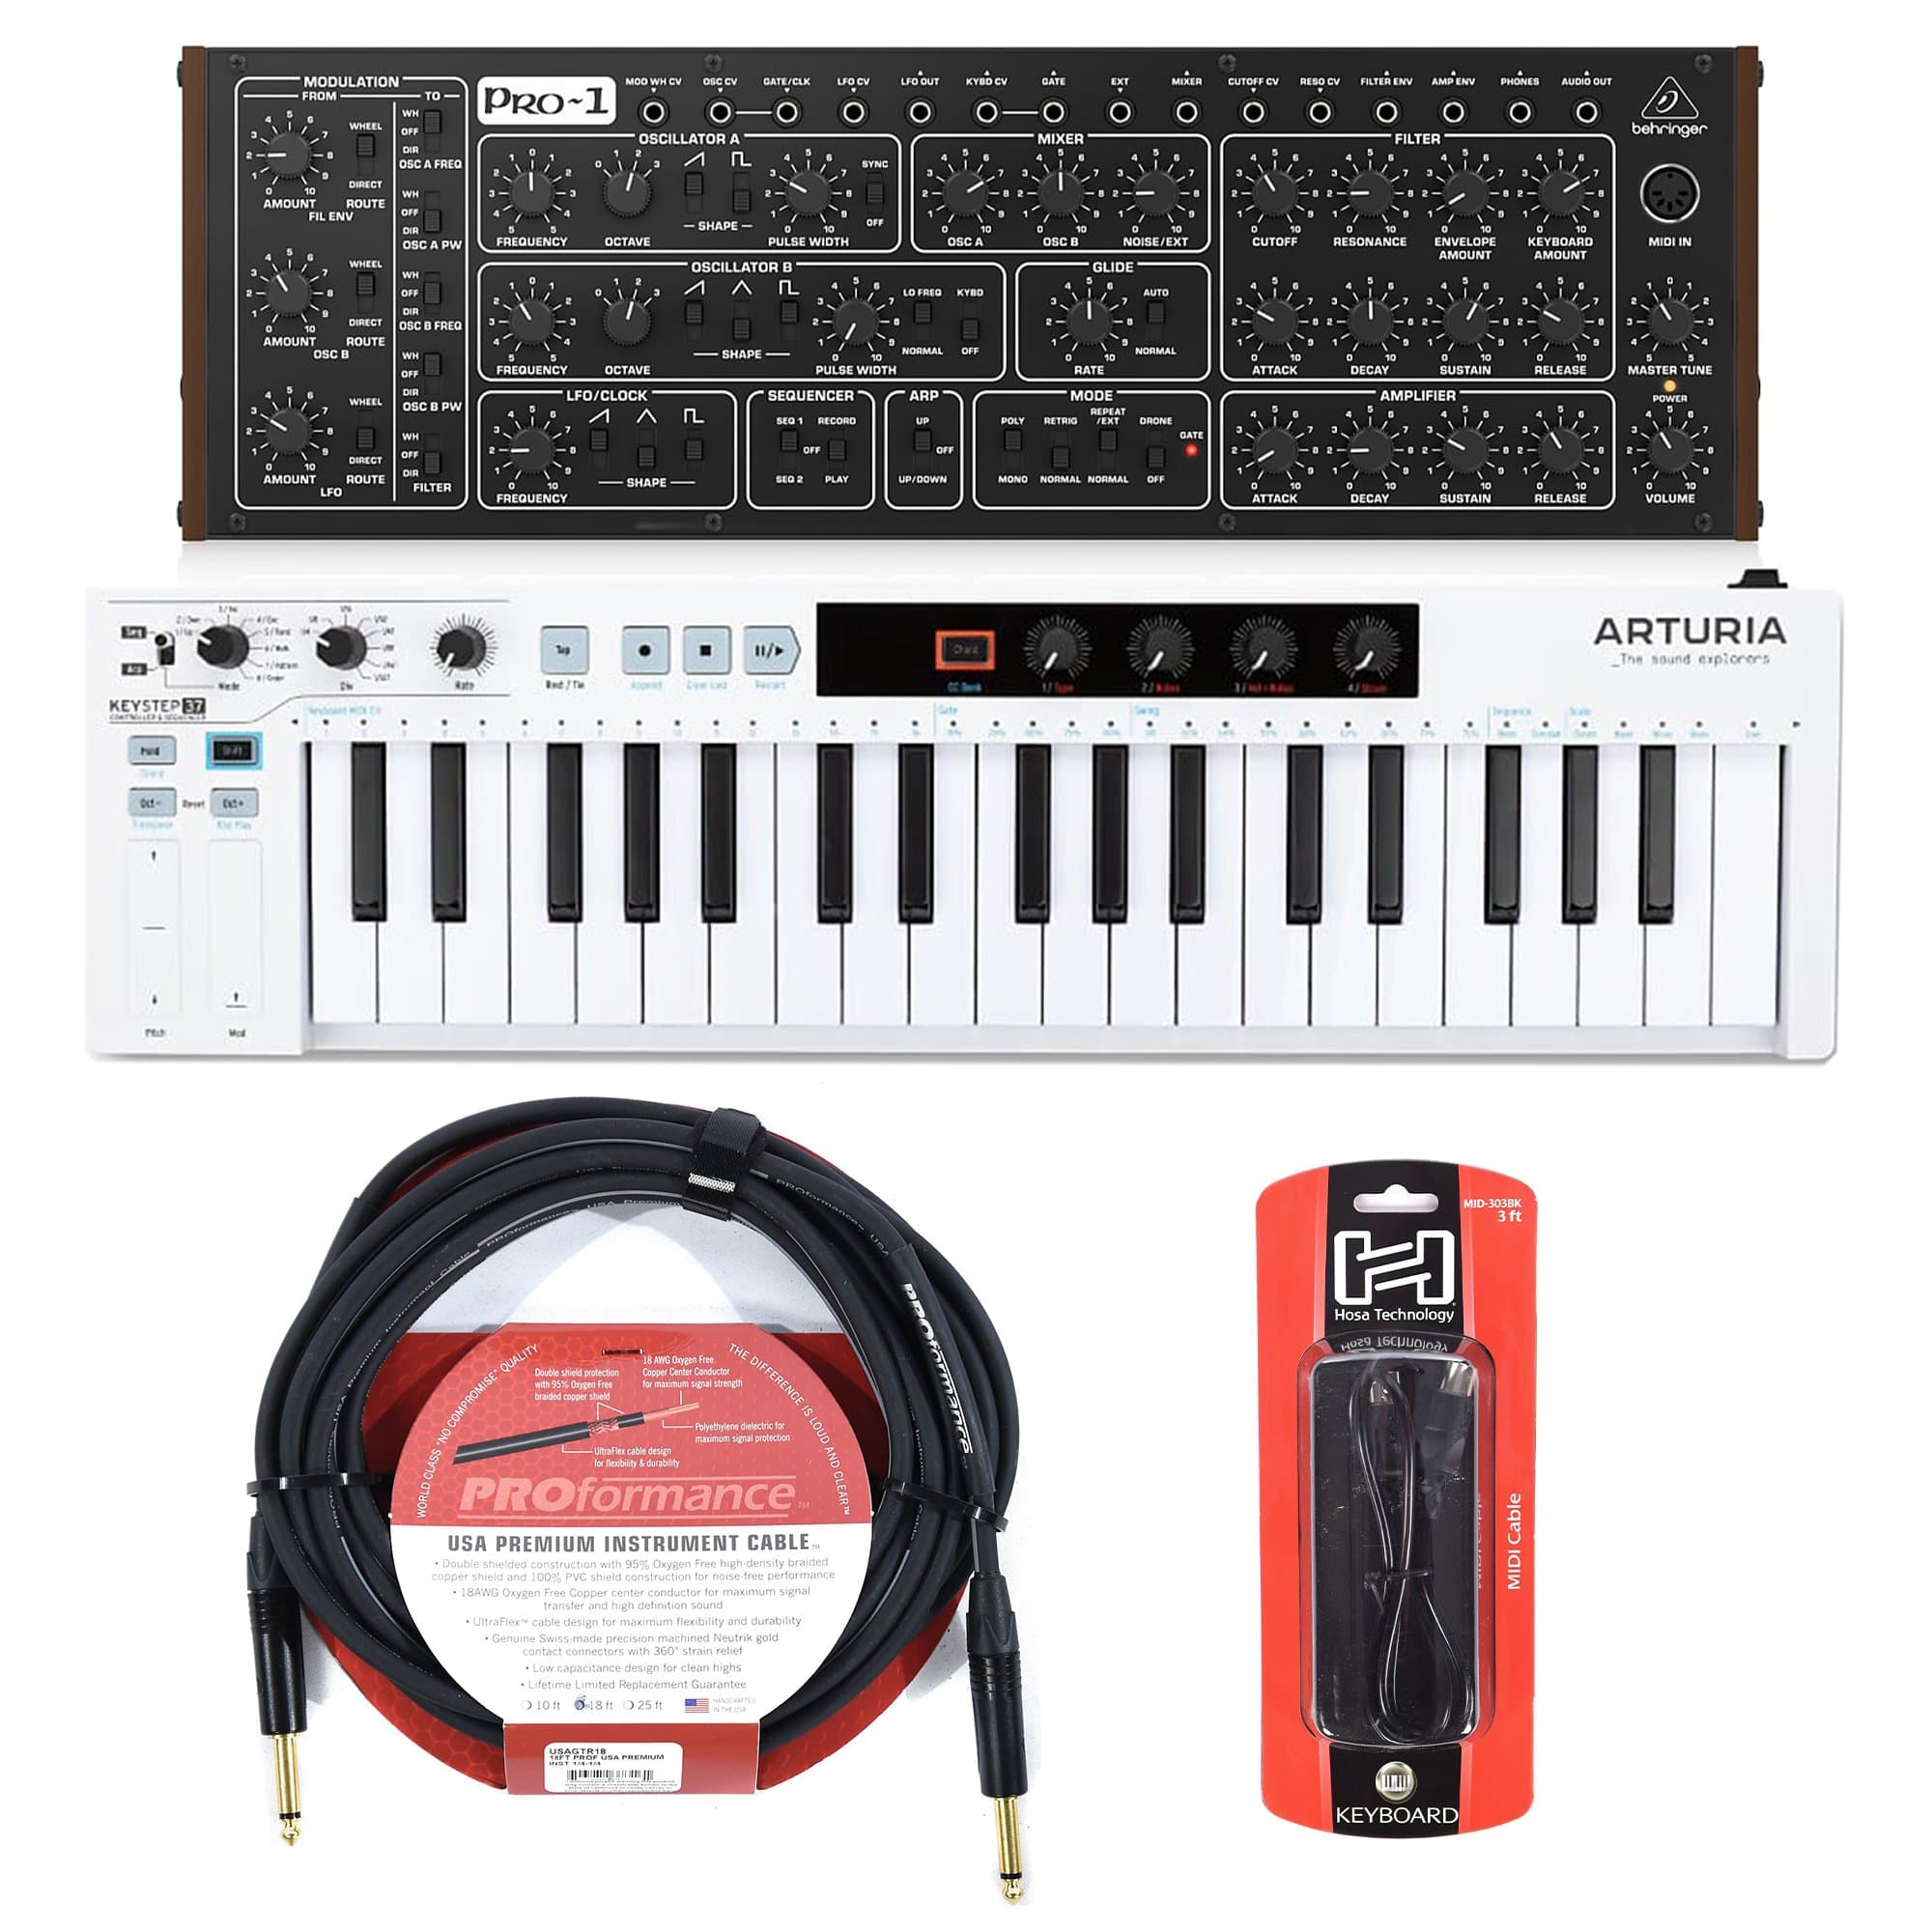 Our engineering teams are working on close to 100 exciting products: So,  what's happened to the synths and drum machines that Behringer has  announced that aren't in the shops yet?